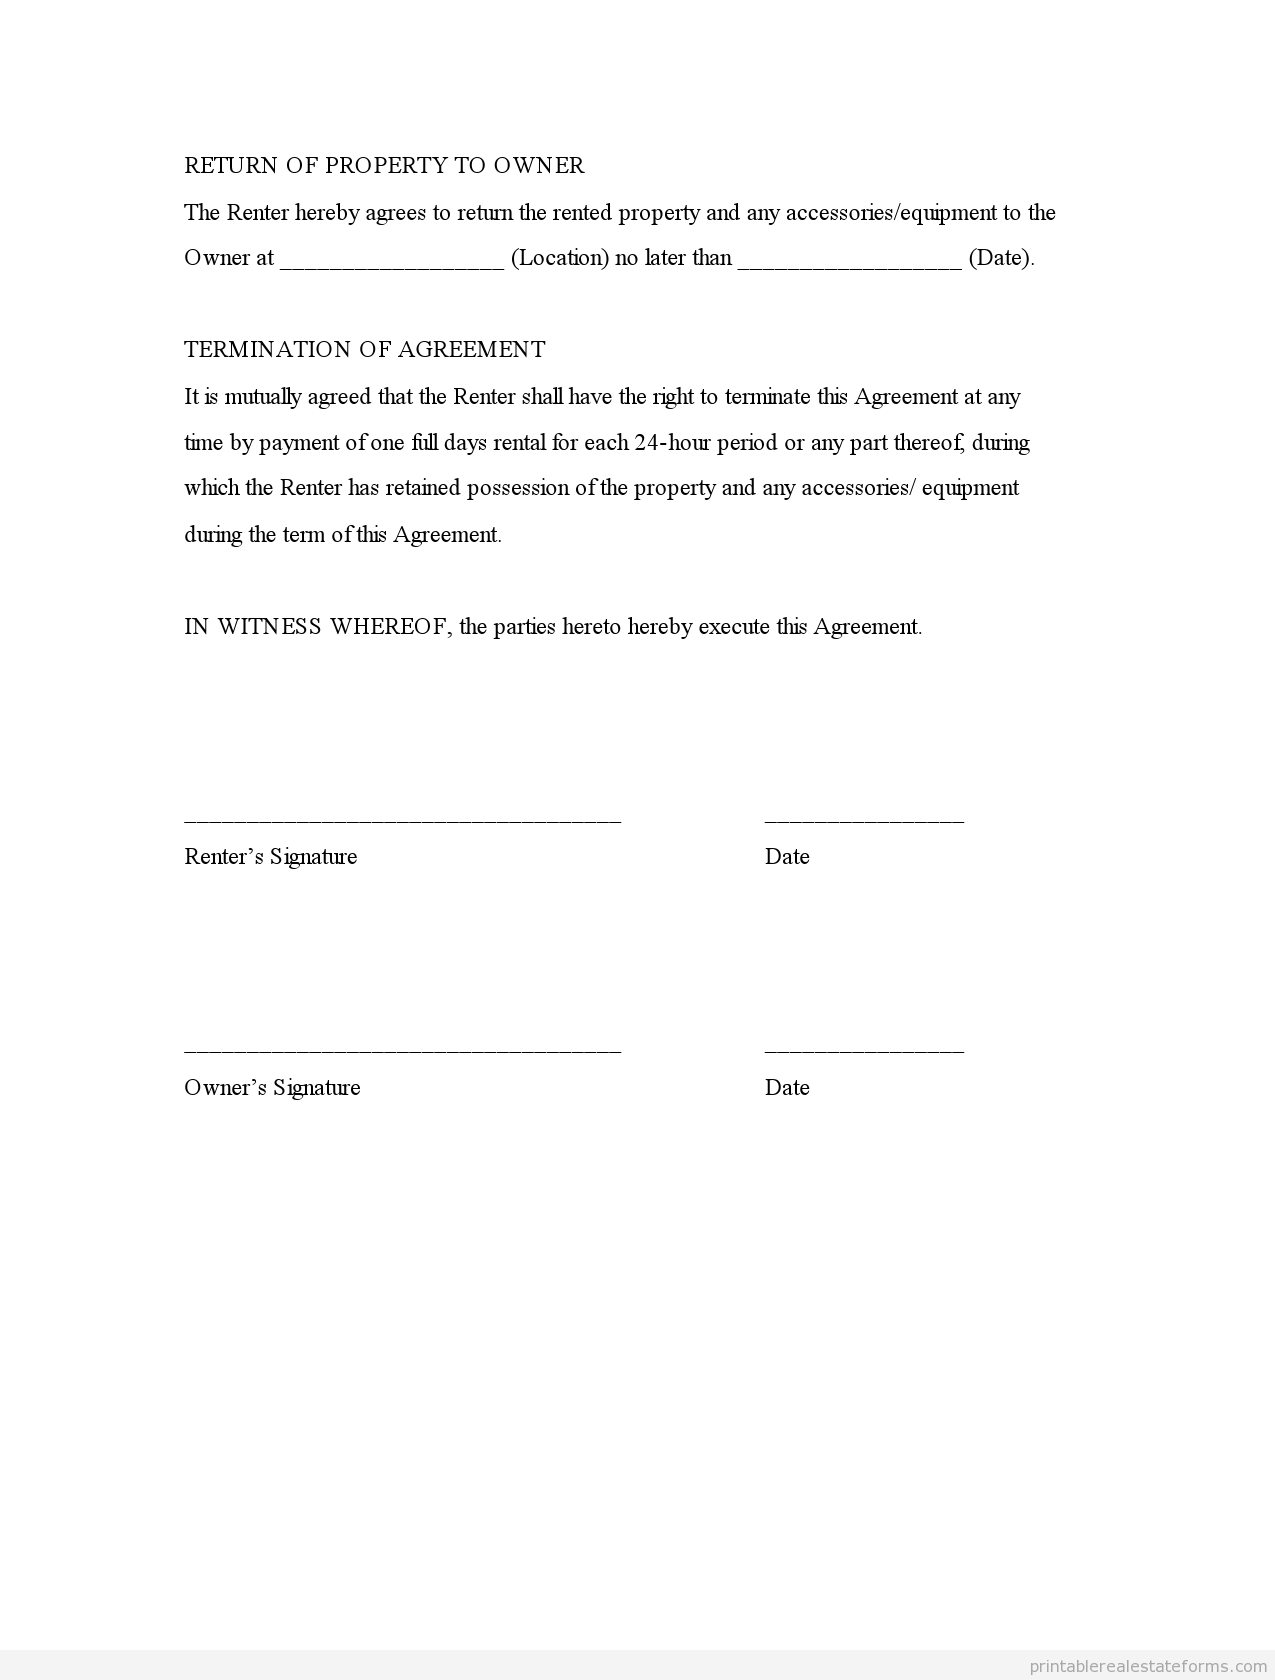 rental-agreement-forms-free-printable-generic-template